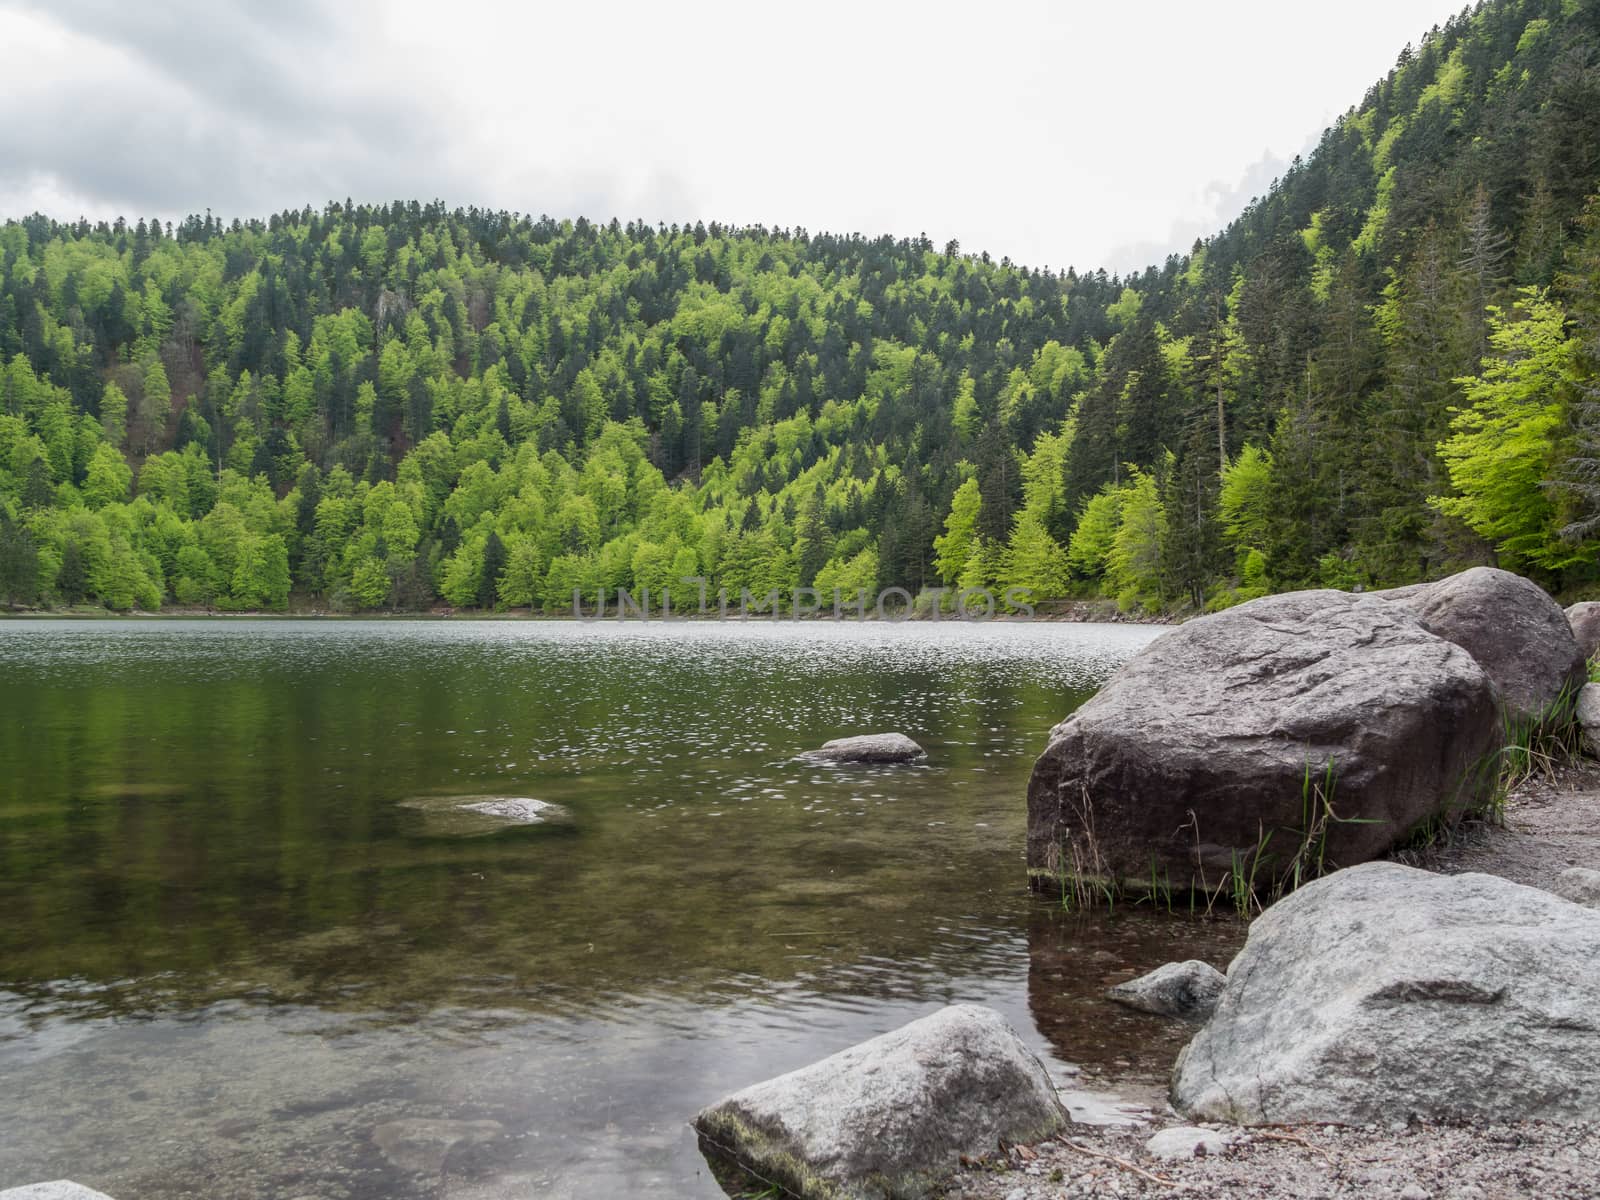 Looking past rocks over lac des corbeaux in France